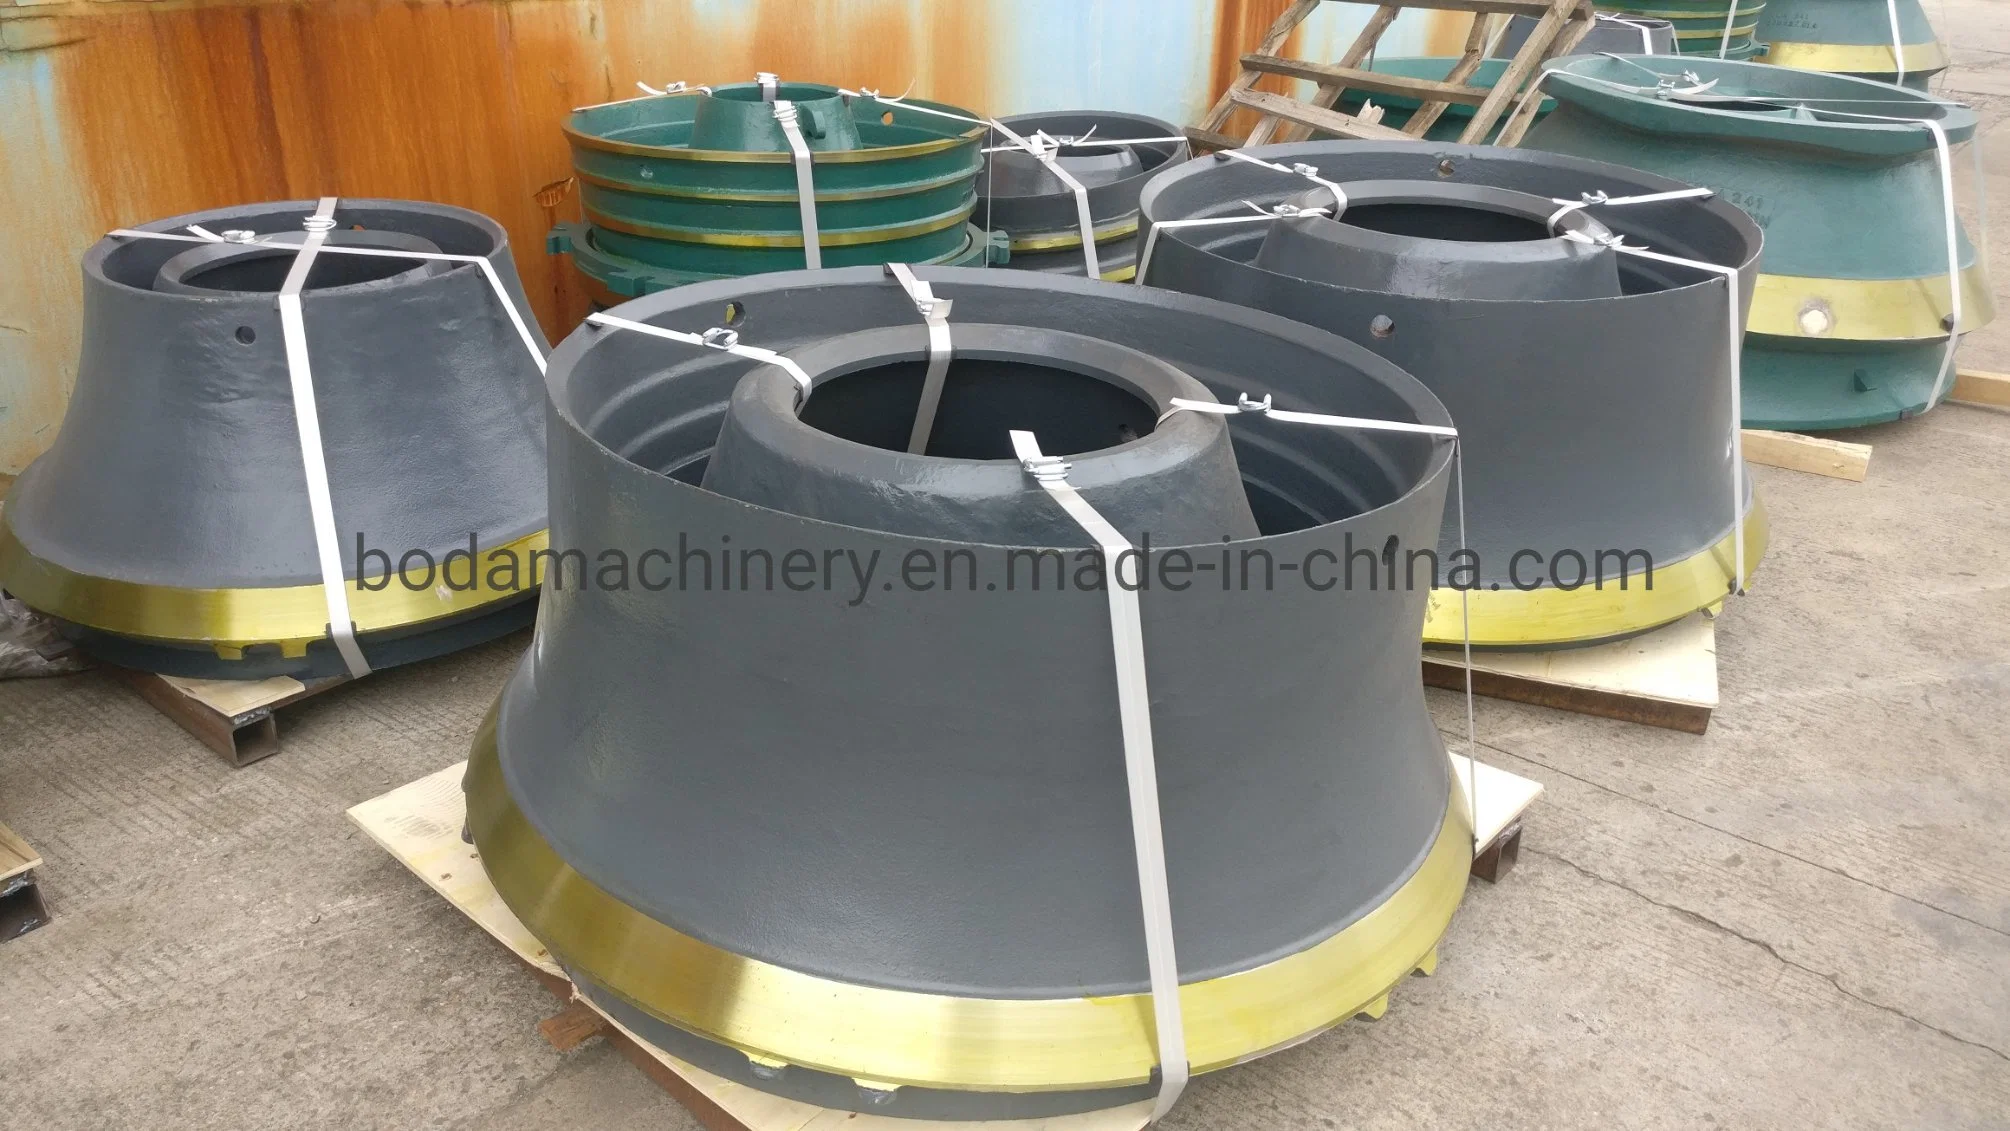 Mining Construction Cj409 Machine Spare Parts Jaw Crusher Wear Parts